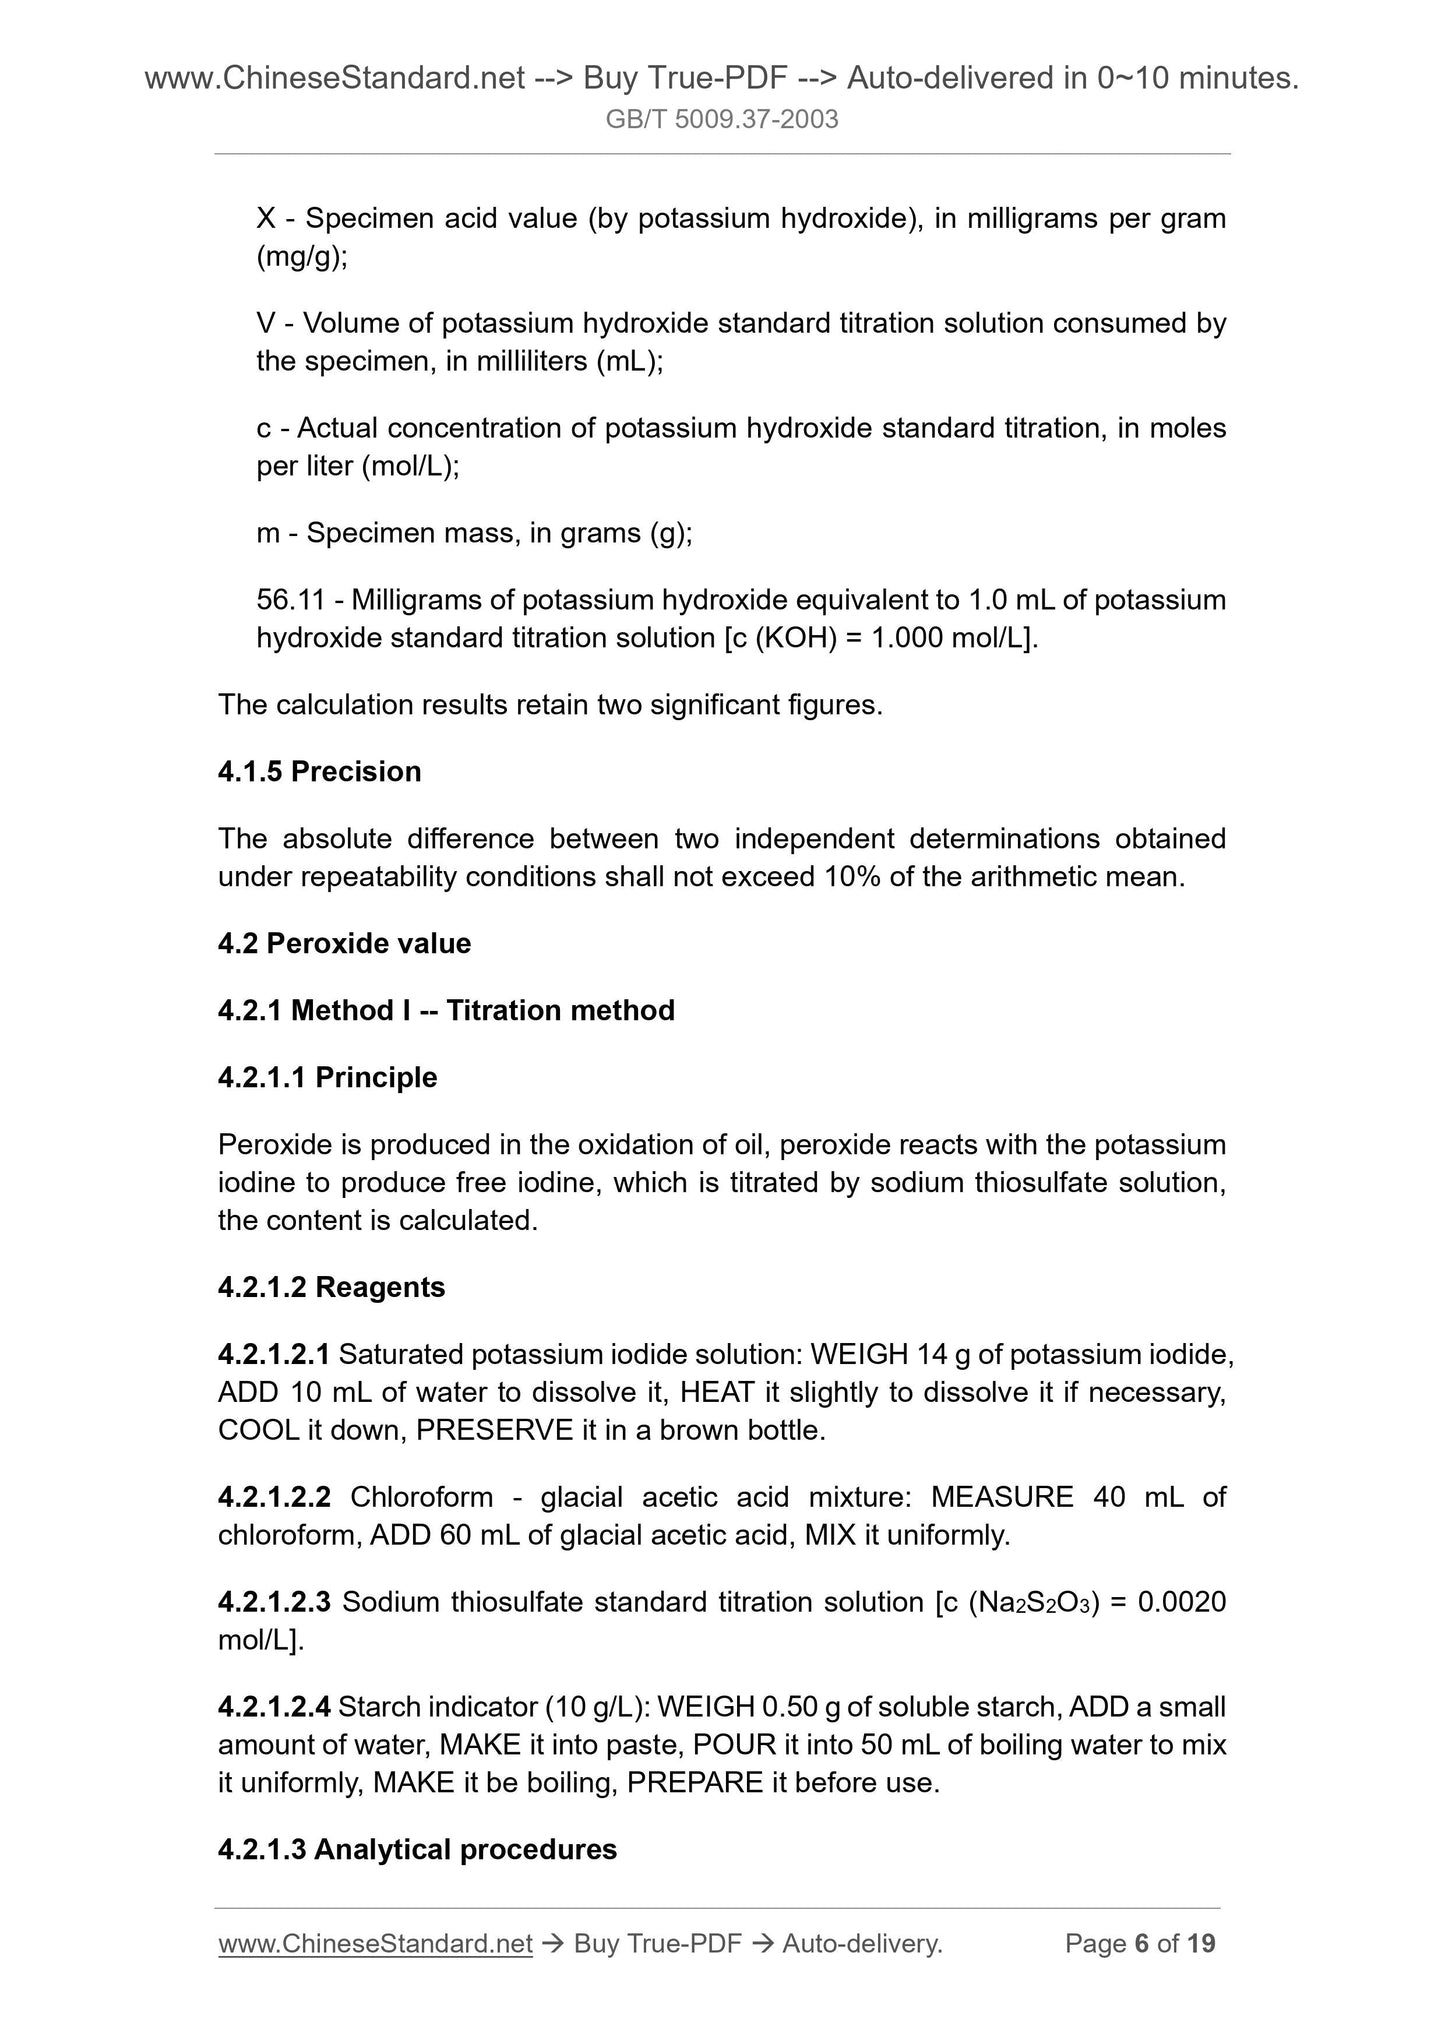 GB/T 5009.37-2003 Page 5